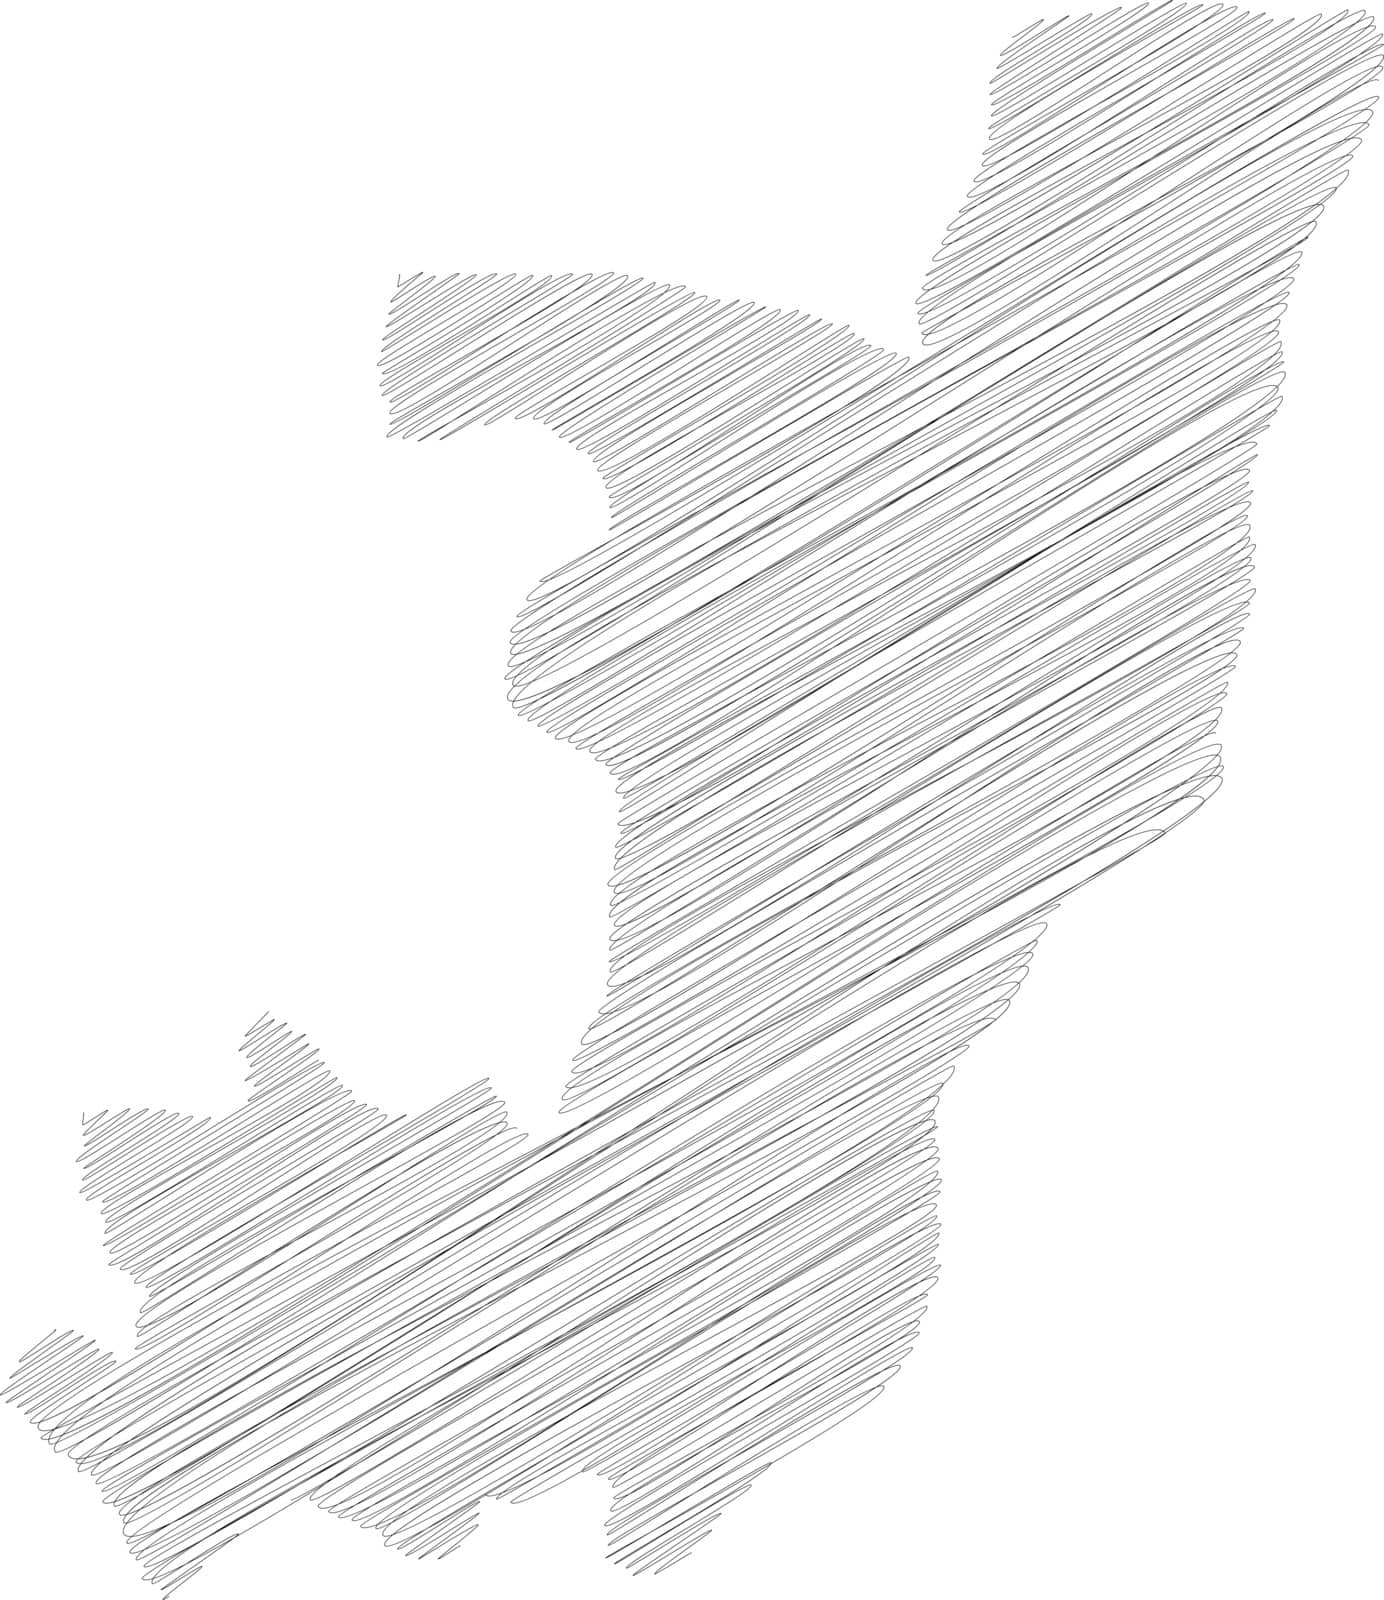 Republic of the Congo, former Zaire - pencil scribble sketch silhouette map of country area with dropped shadow. Simple flat vector illustration.